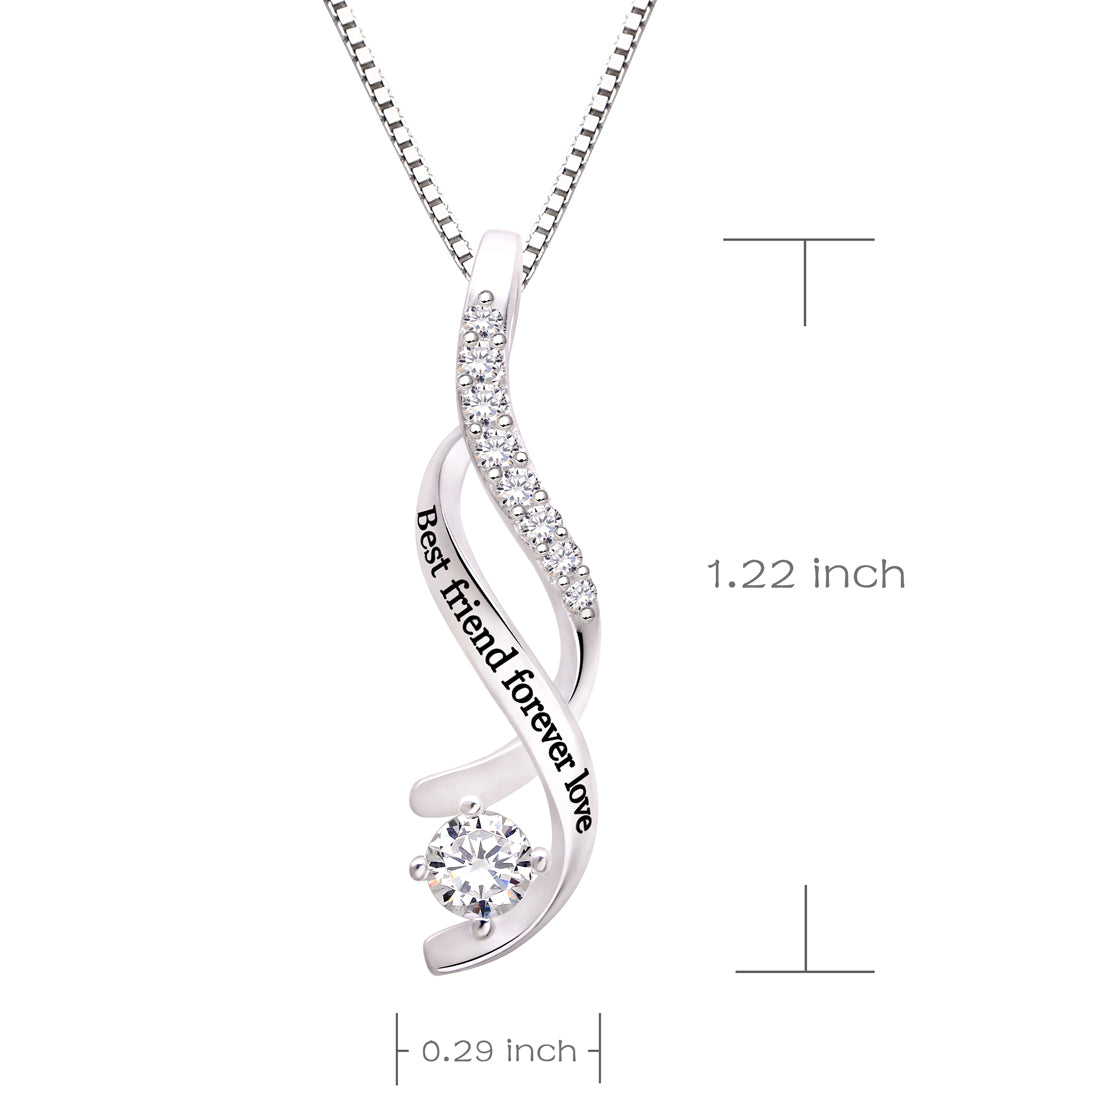 ALOV Jewelry Sterling Silver Best friend forever love Cubic Zirconia Pendant Necklace